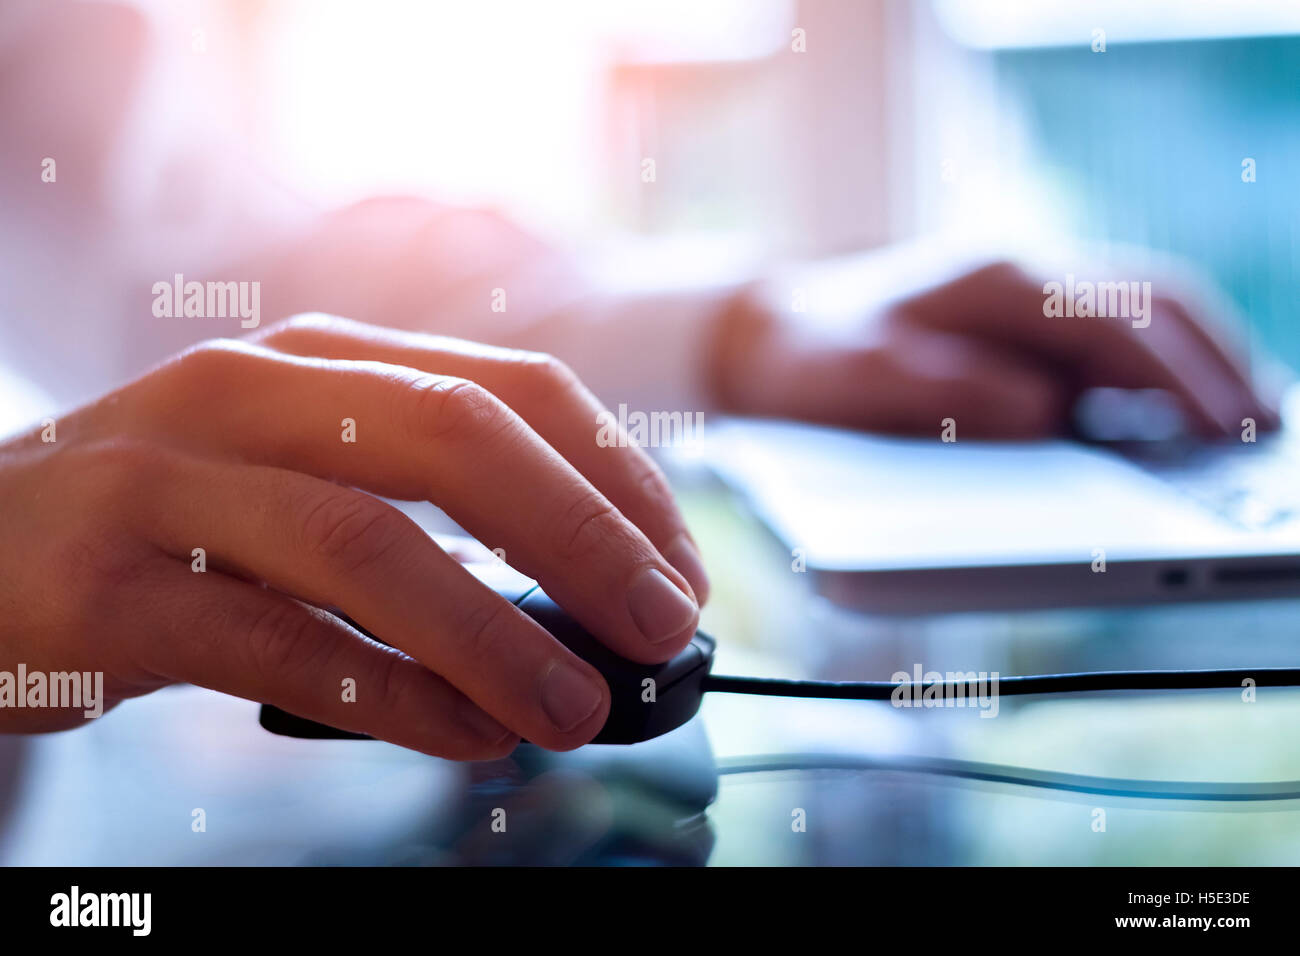 Male hand holding computer mouse with laptop keyboard in the background Stock Photo